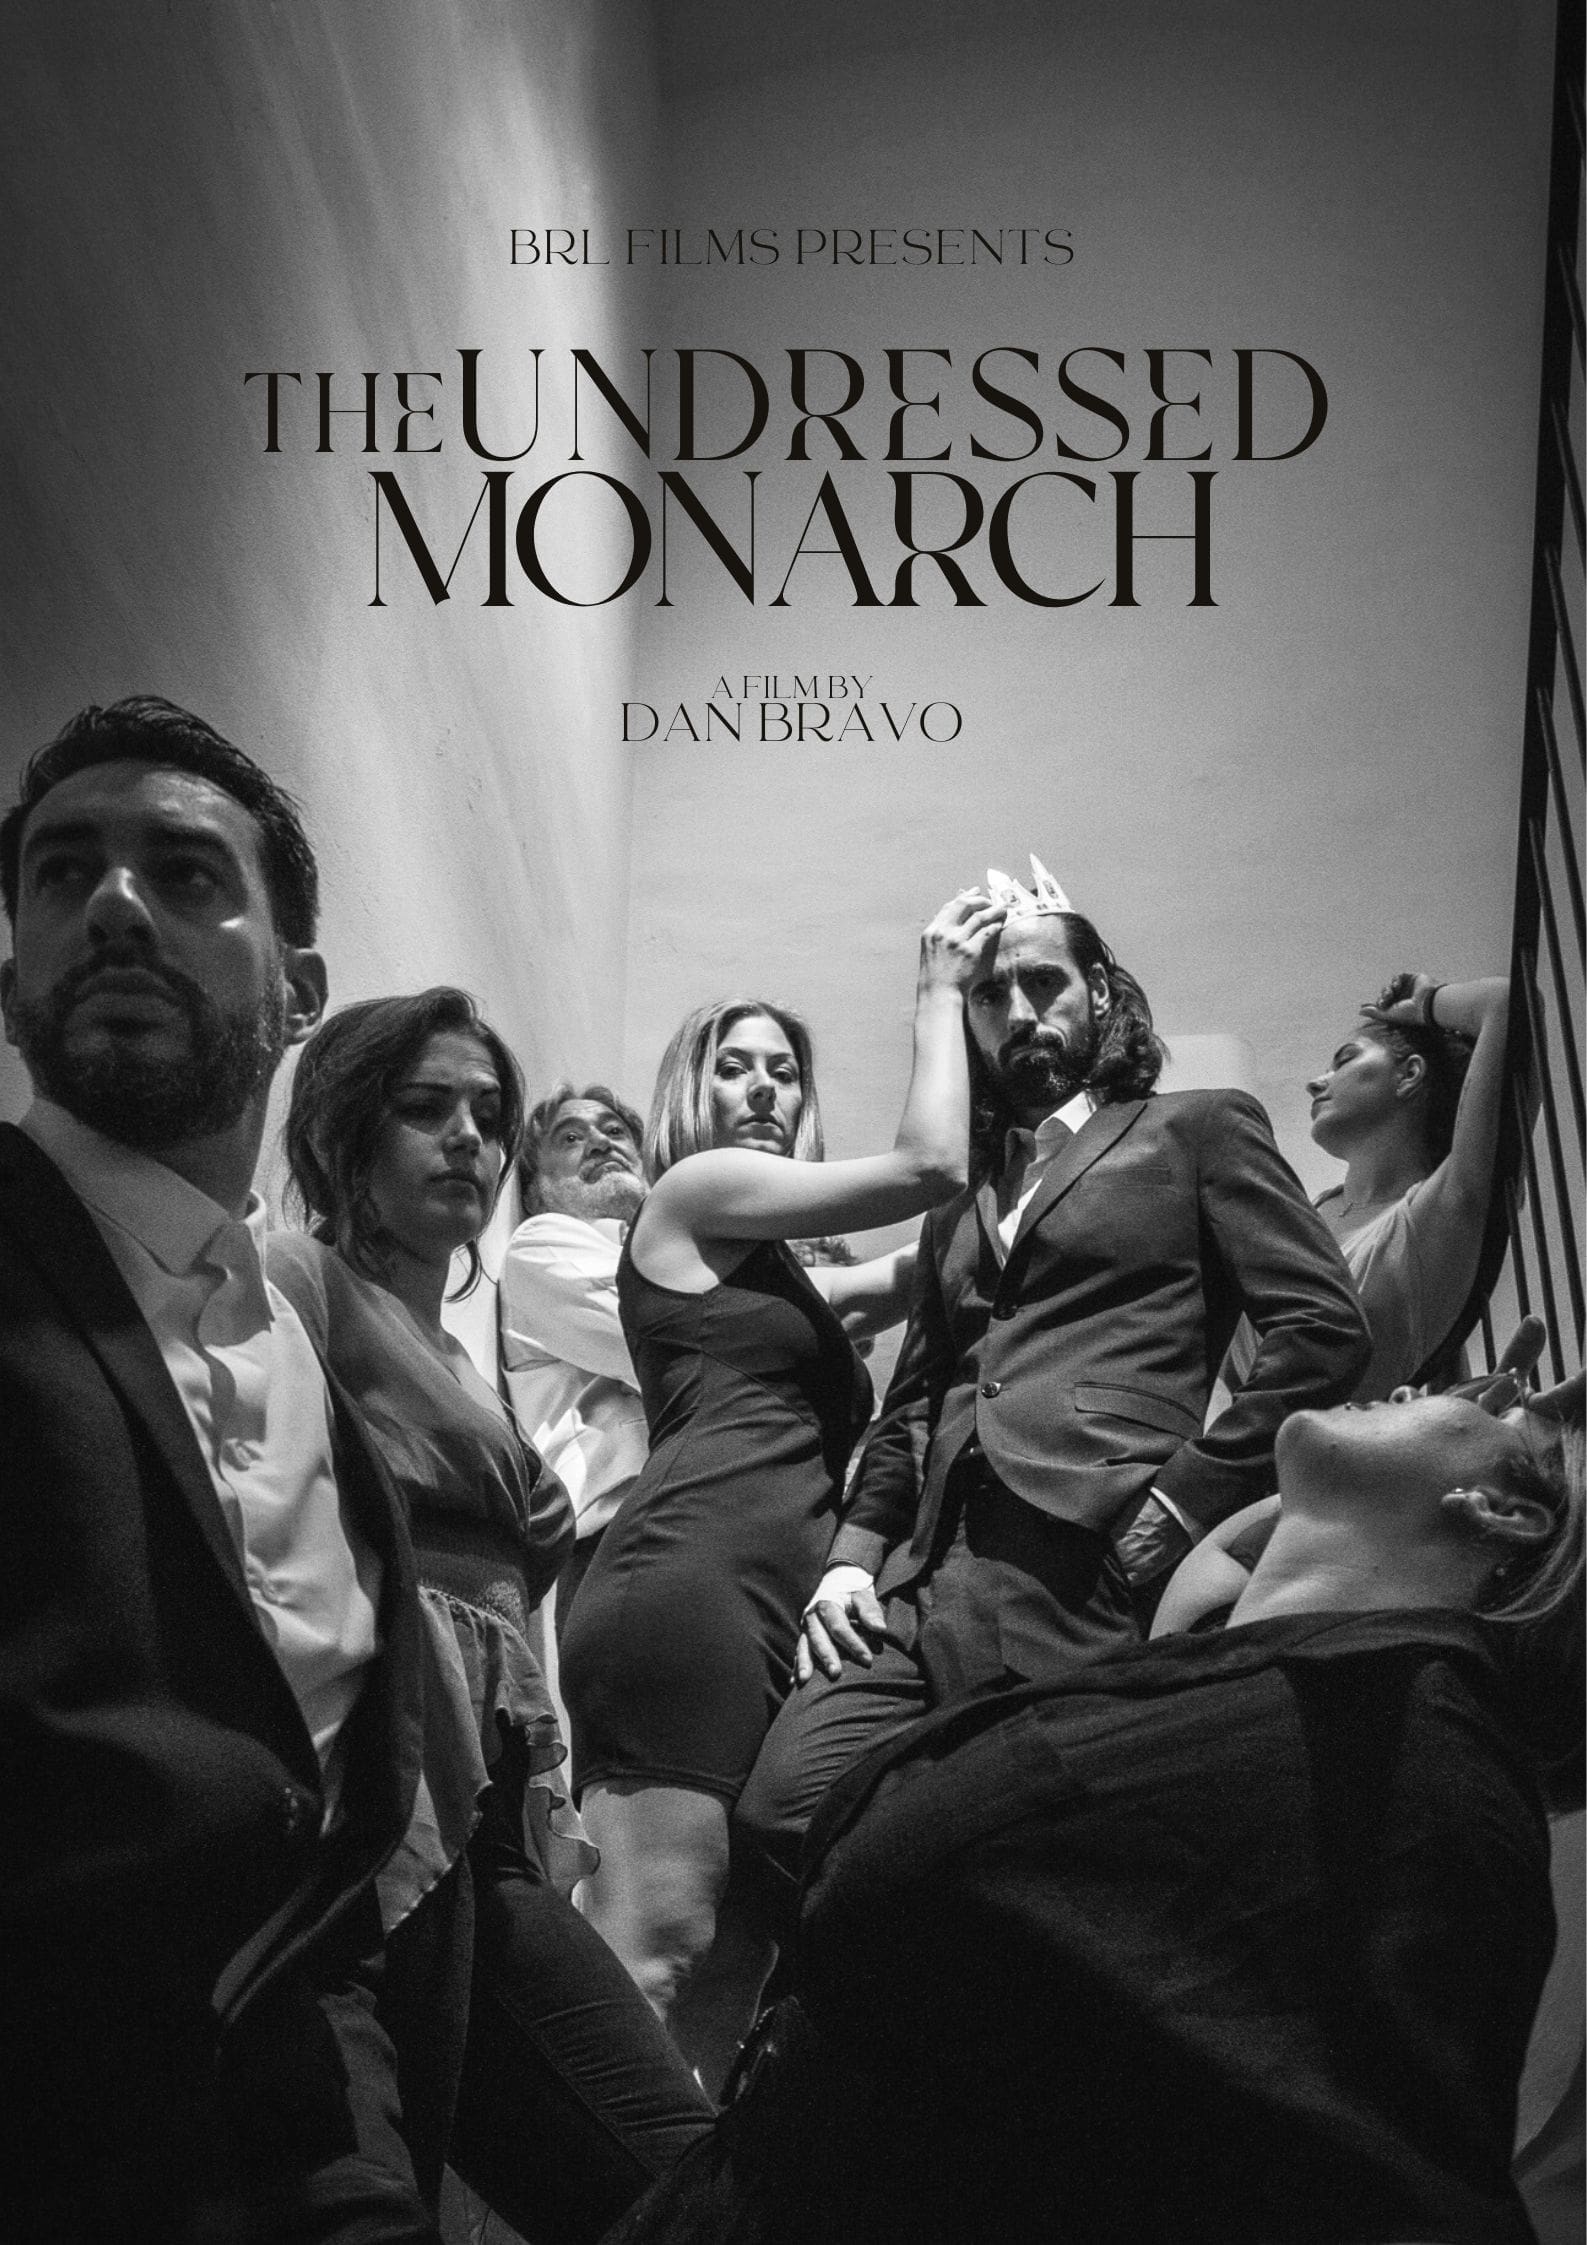 The Undressed Monarch